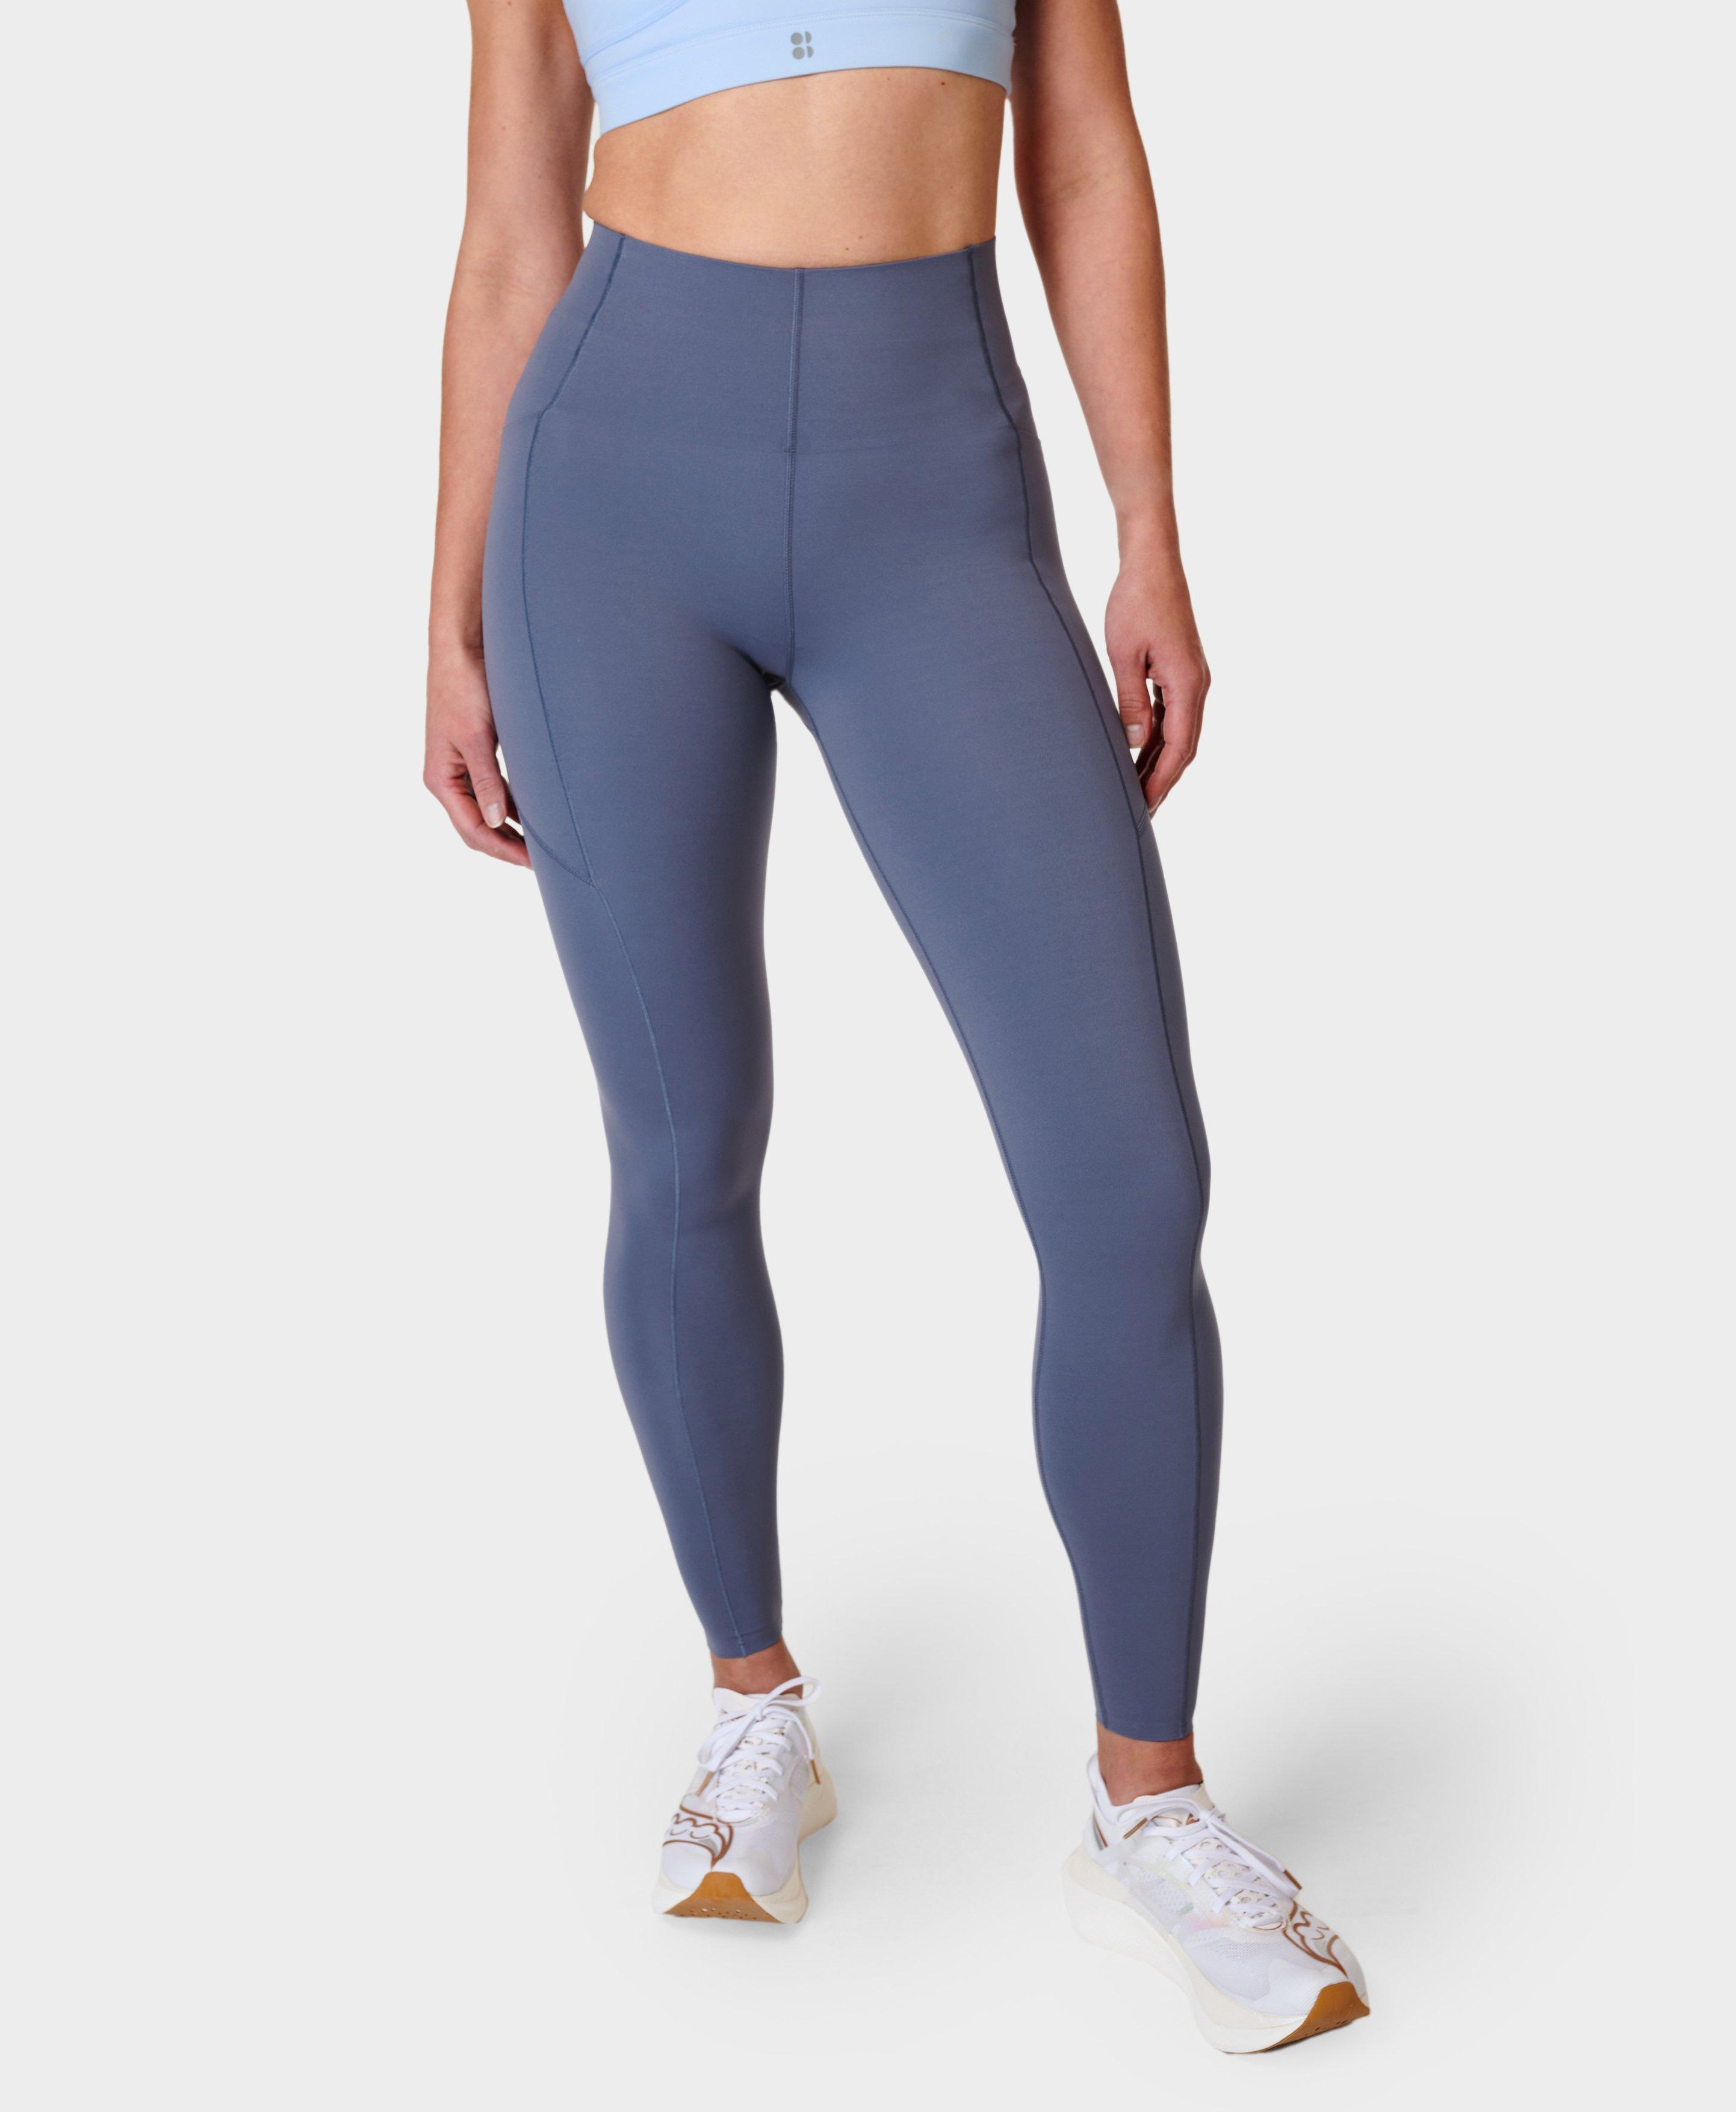 High Waist Seamless High Waisted Running Leggings For Women Perfect For  Fitness, Running, Yoga, Gym Workouts And Gymwear With Push Up Pockets From  Lucky0317, $14.73